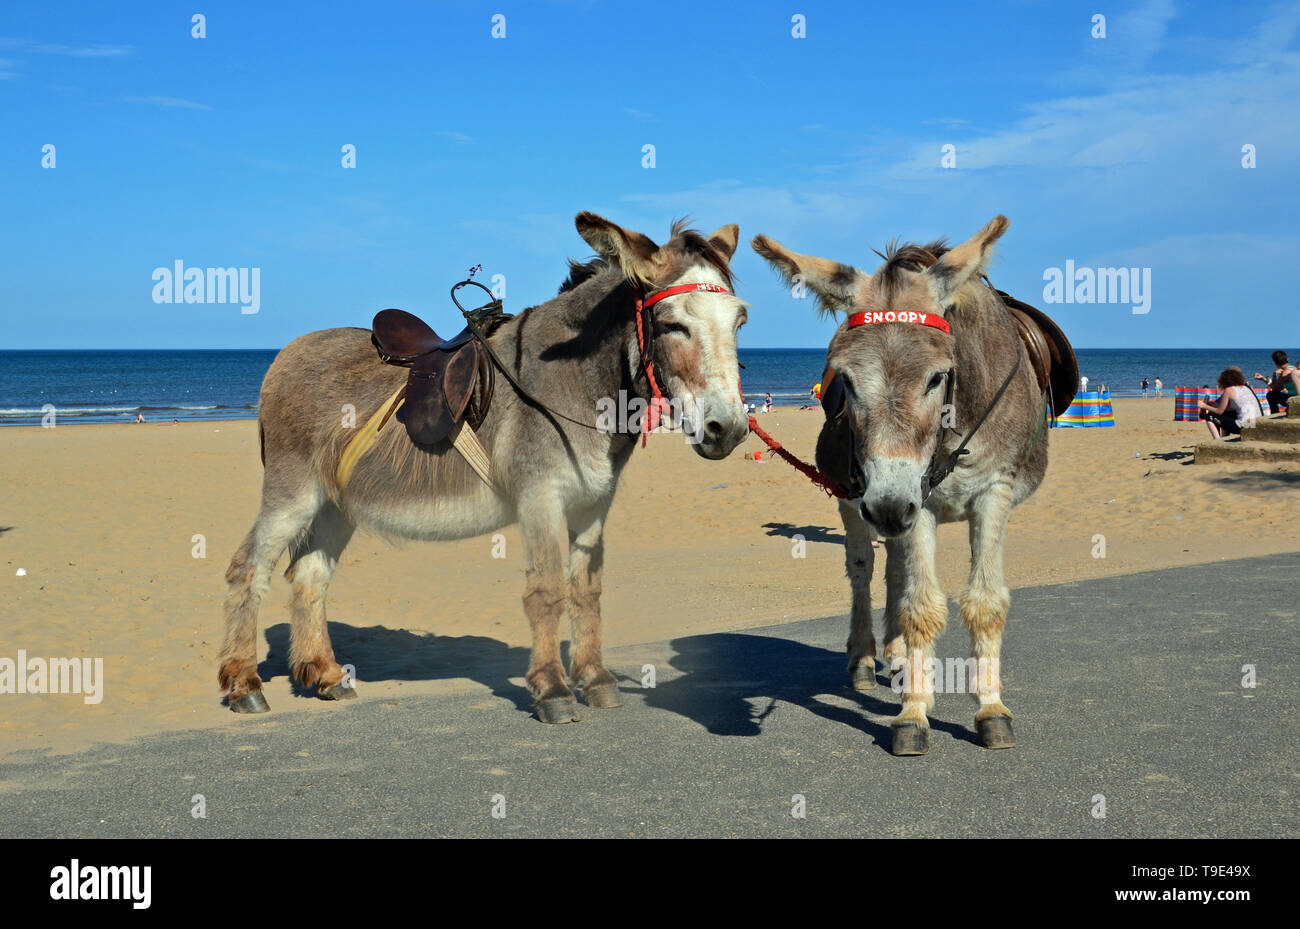 Donkeys on the beach at Mablethorpe, Lincolnshire, UK Stock Photo